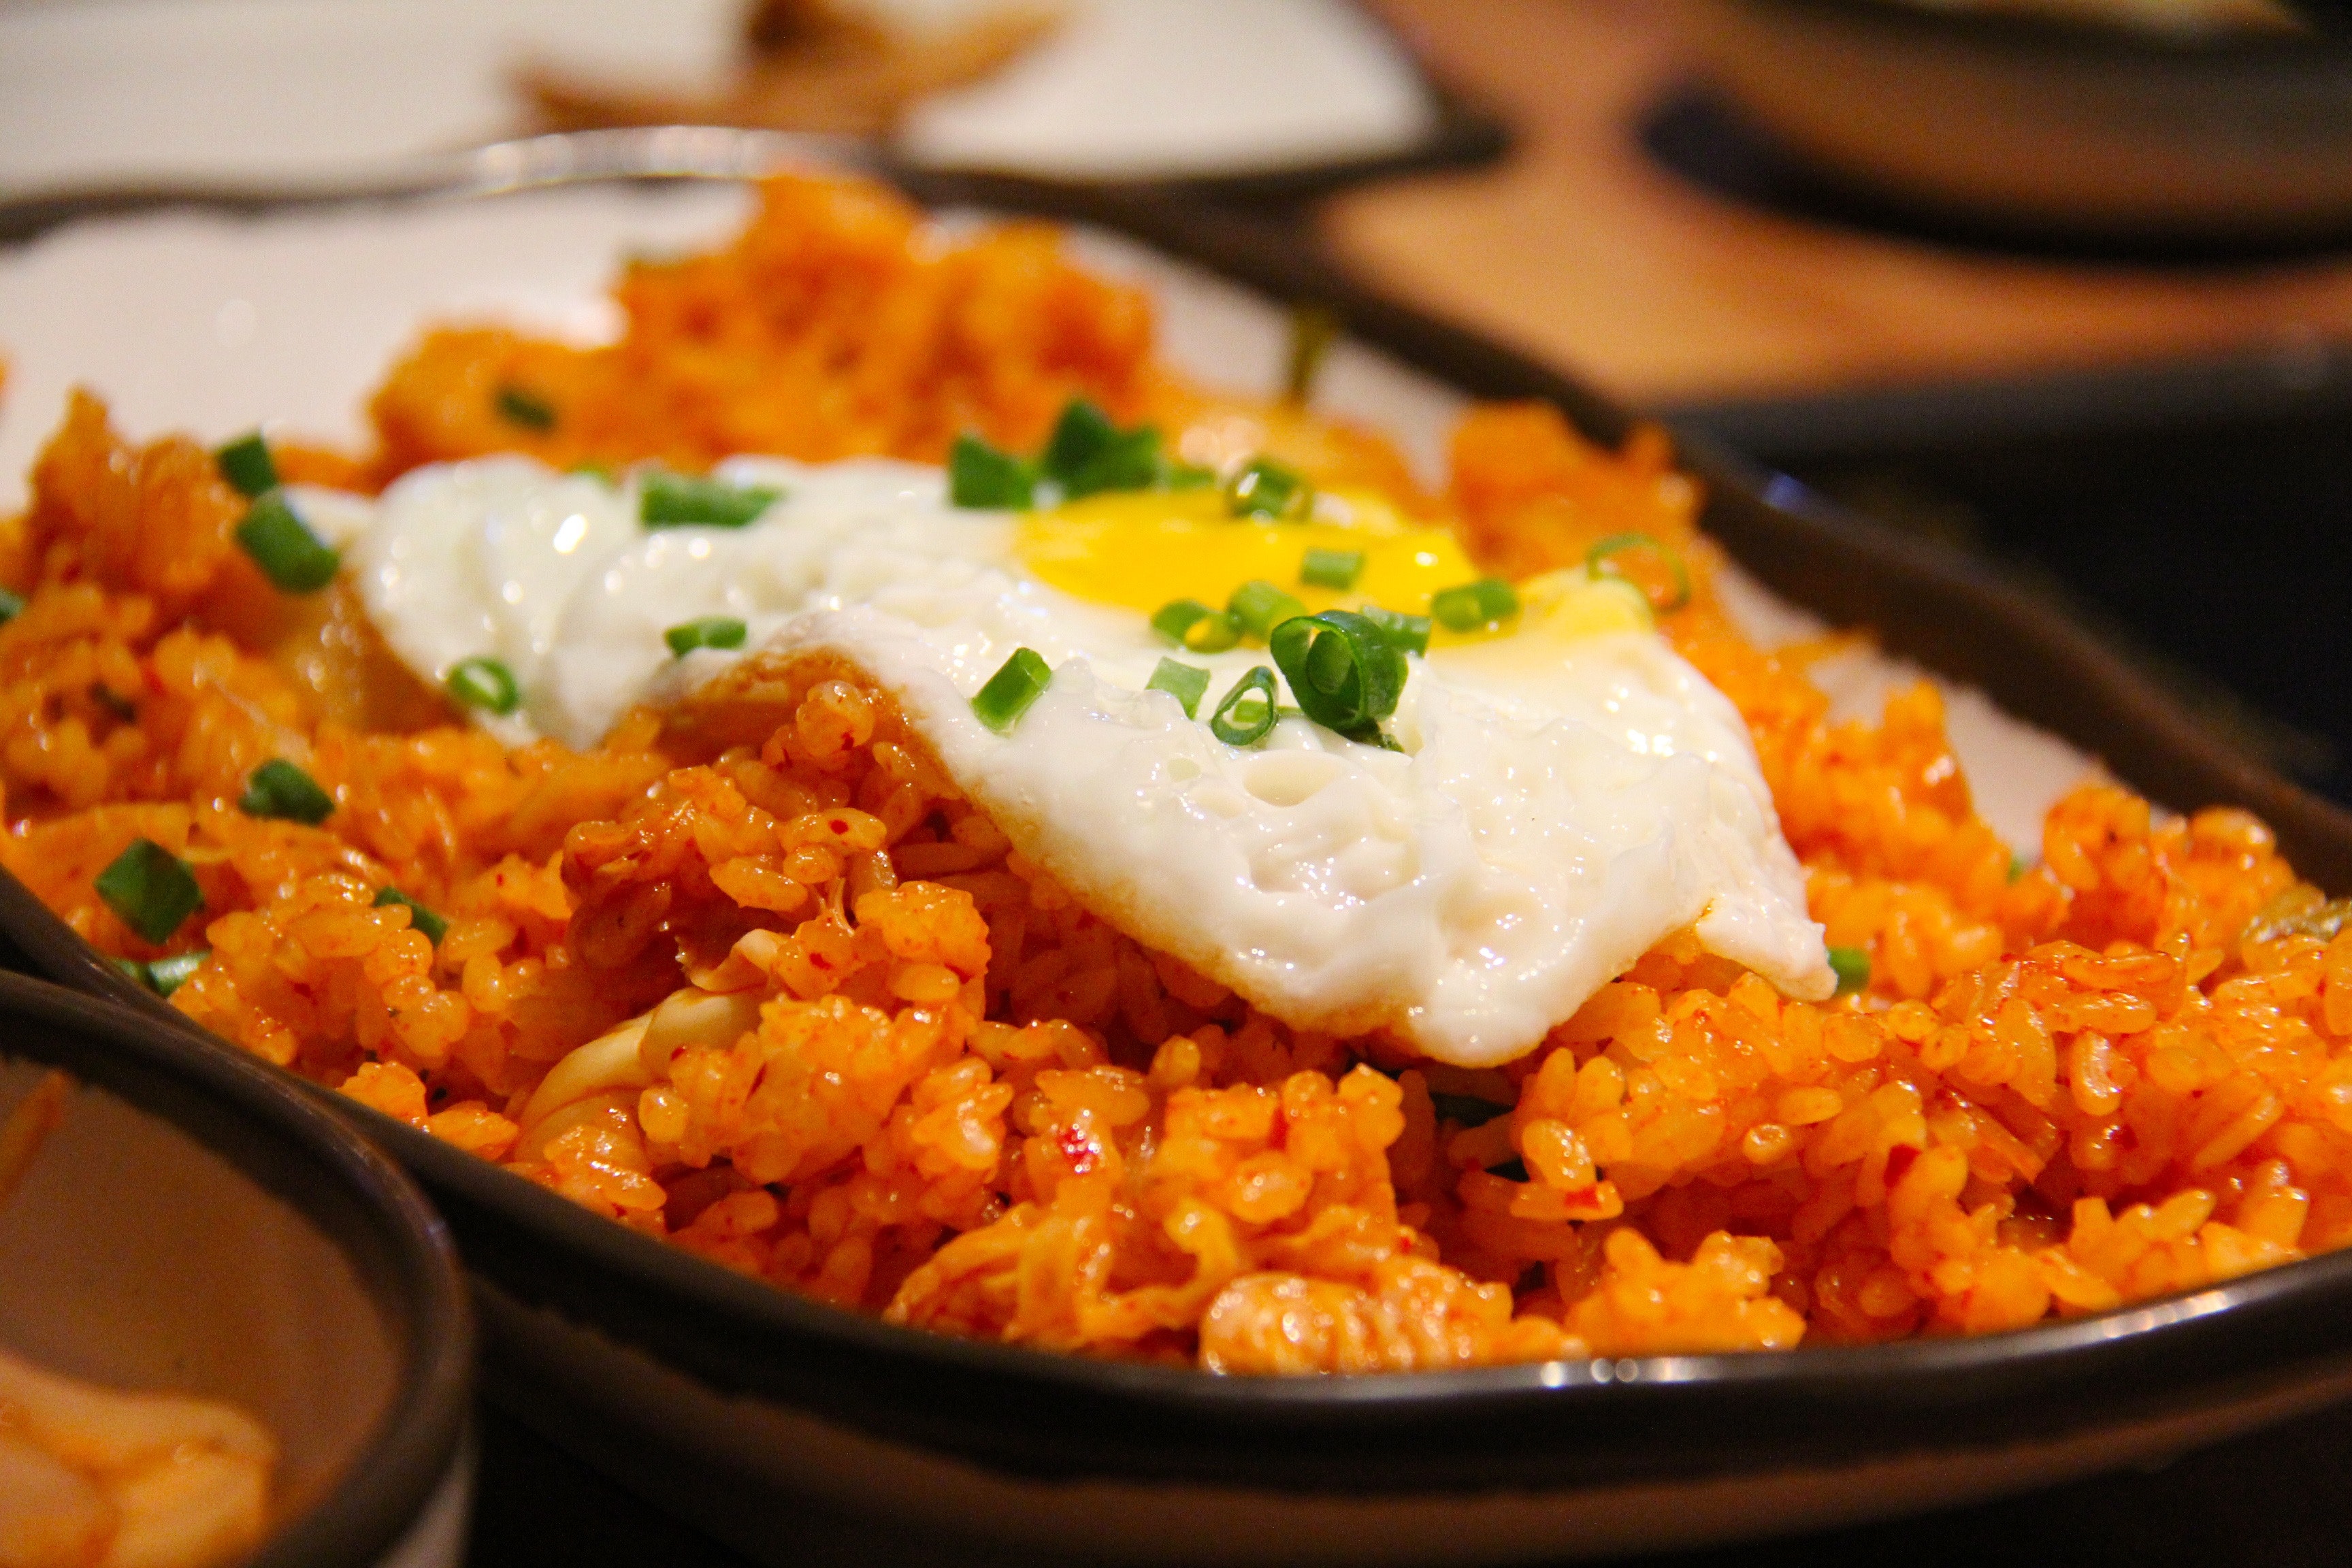 White and yellow sunny side up egg on fried rice photo